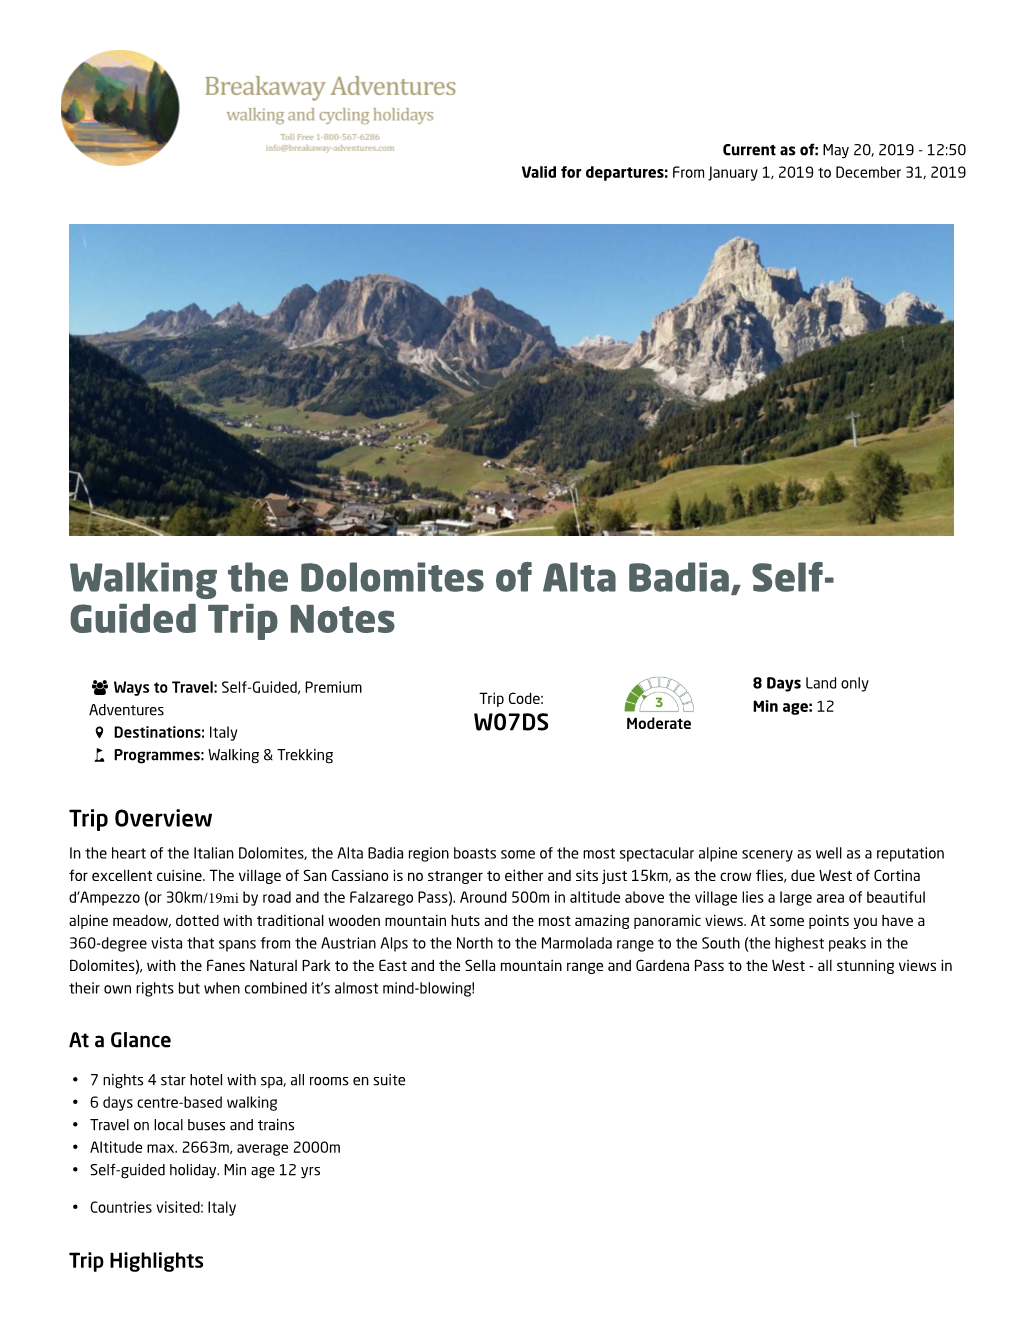 Walking the Dolomites of Alta Badia, Self- Guided Trip Notes